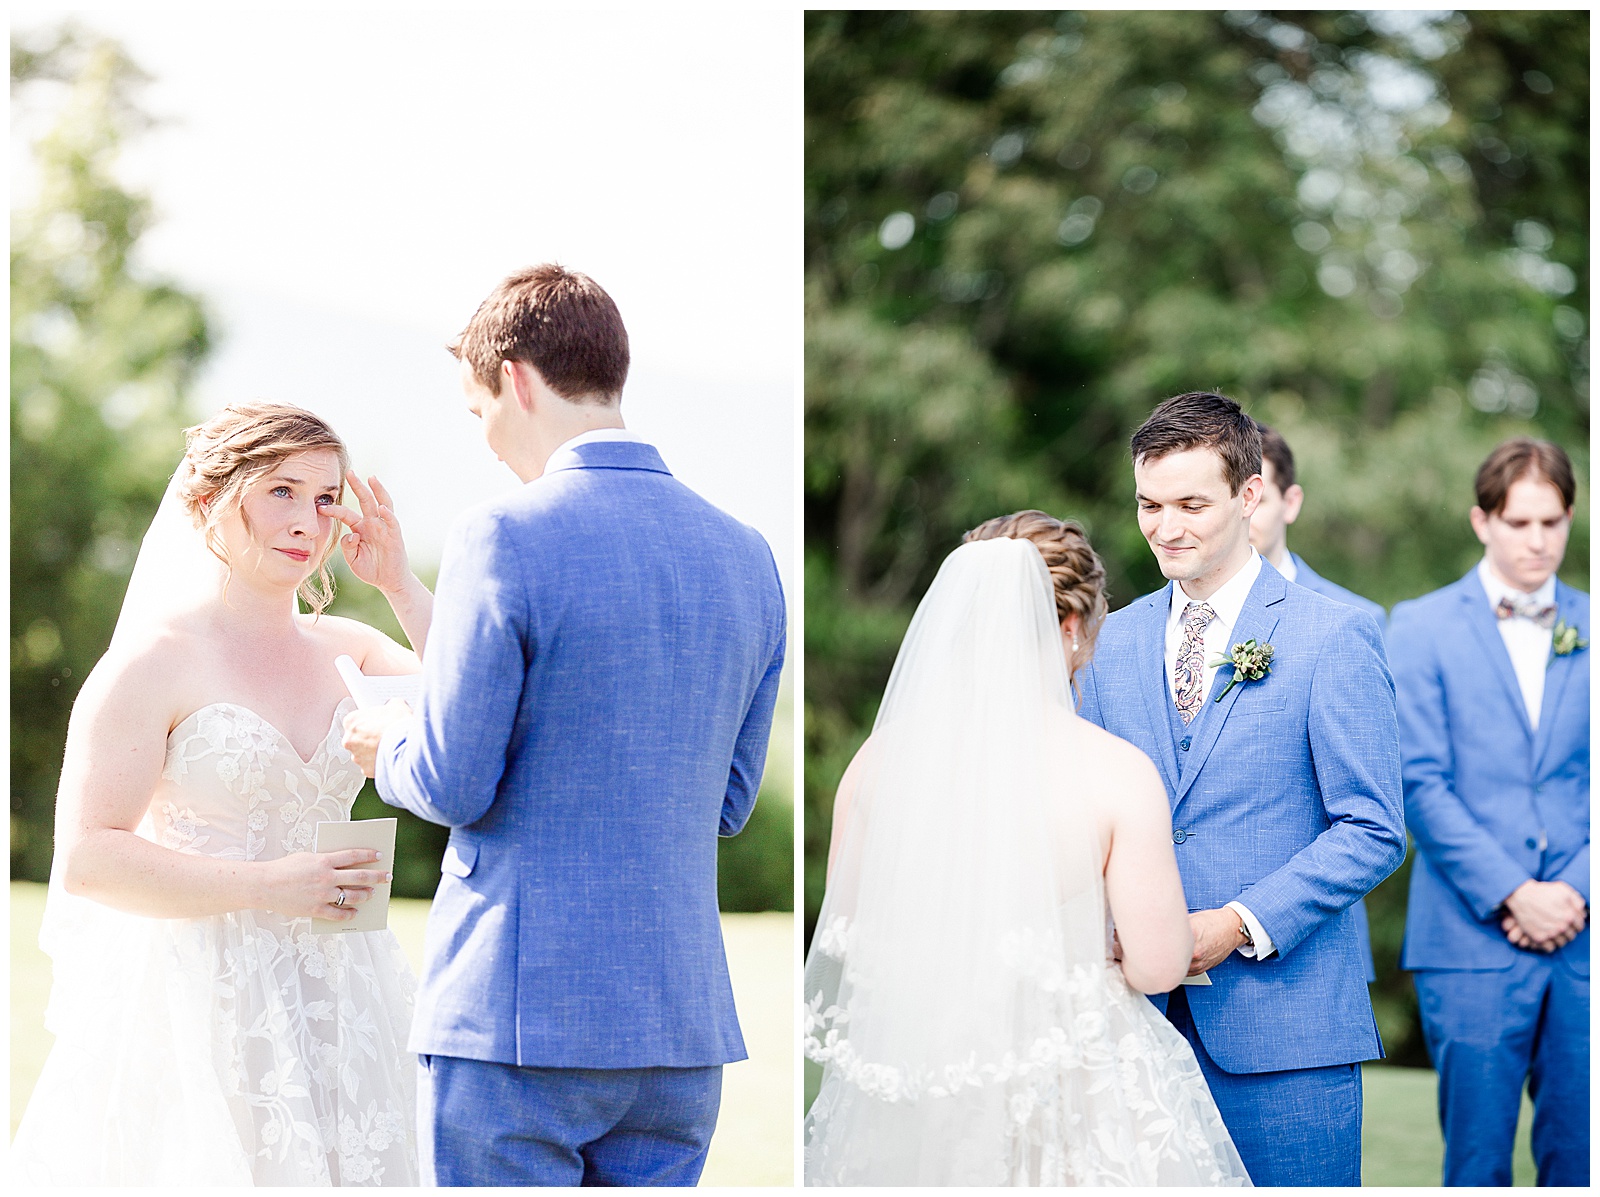 Bride and groom special moment during ceremony in Outdoorsy Summer Wedding at North Carolina Lakehouse in the Mountains | check out the full wedding at KevynDixonPhoto.com